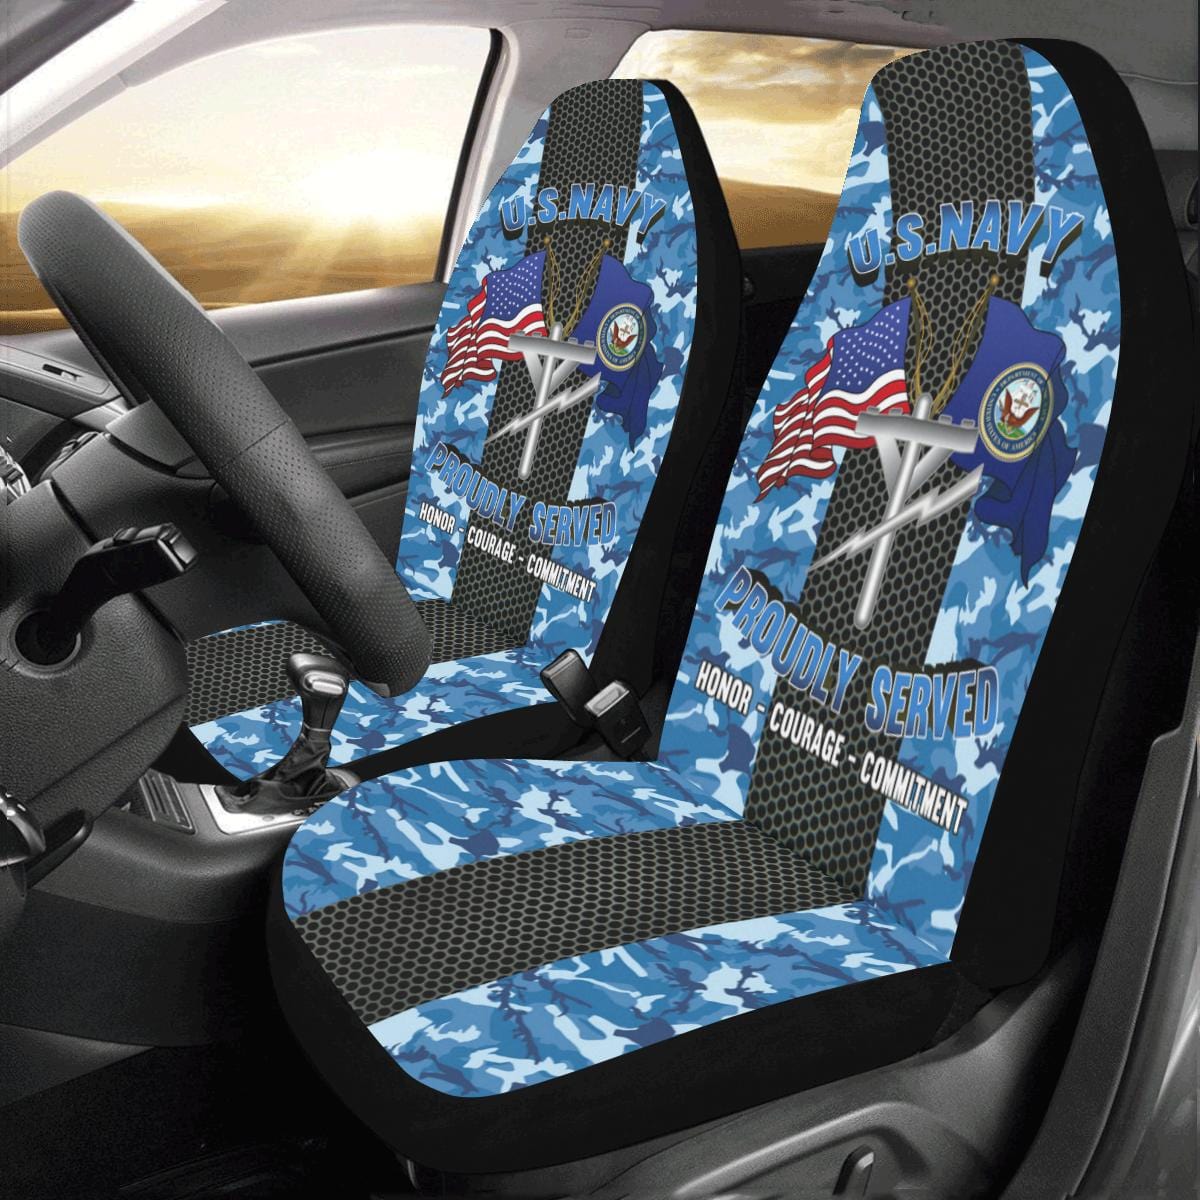 Navy Construction Electrician Navy CE Car Seat Covers (Set of 2)-SeatCovers-Navy-Rate-Veterans Nation